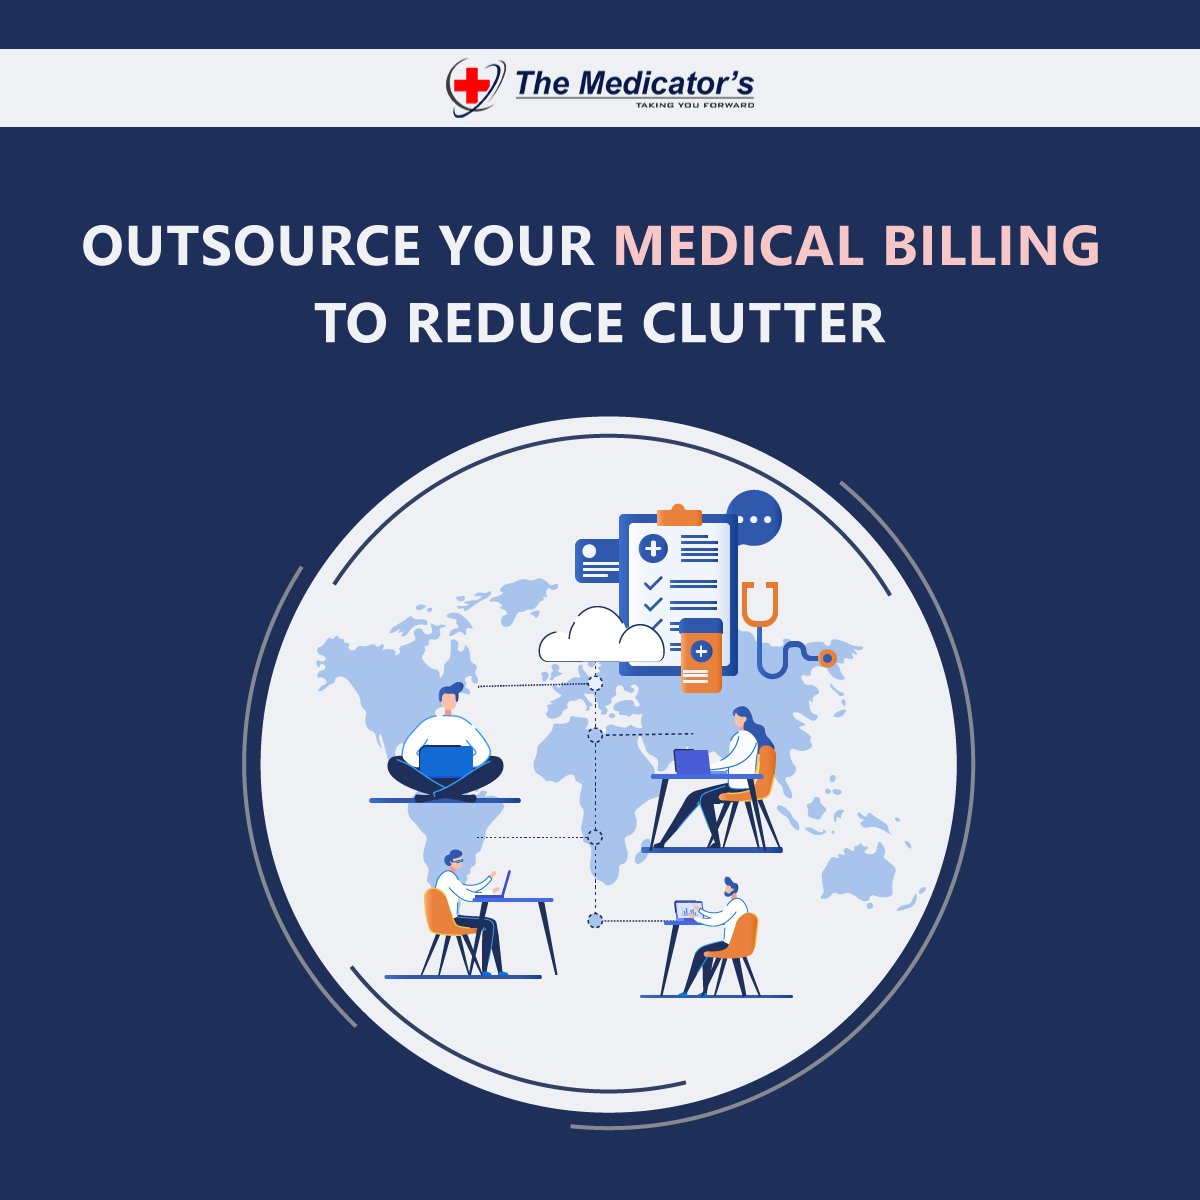 Outsource your billing hassle to us for one-stop solutions. Our professional services boost revenue, cut costs, and enhance practice efficiency.

#MedicalBillingSolutions #RevenueGeneration #PracticeEfficiency #BillingServices #Outsourcing #BillingExperts